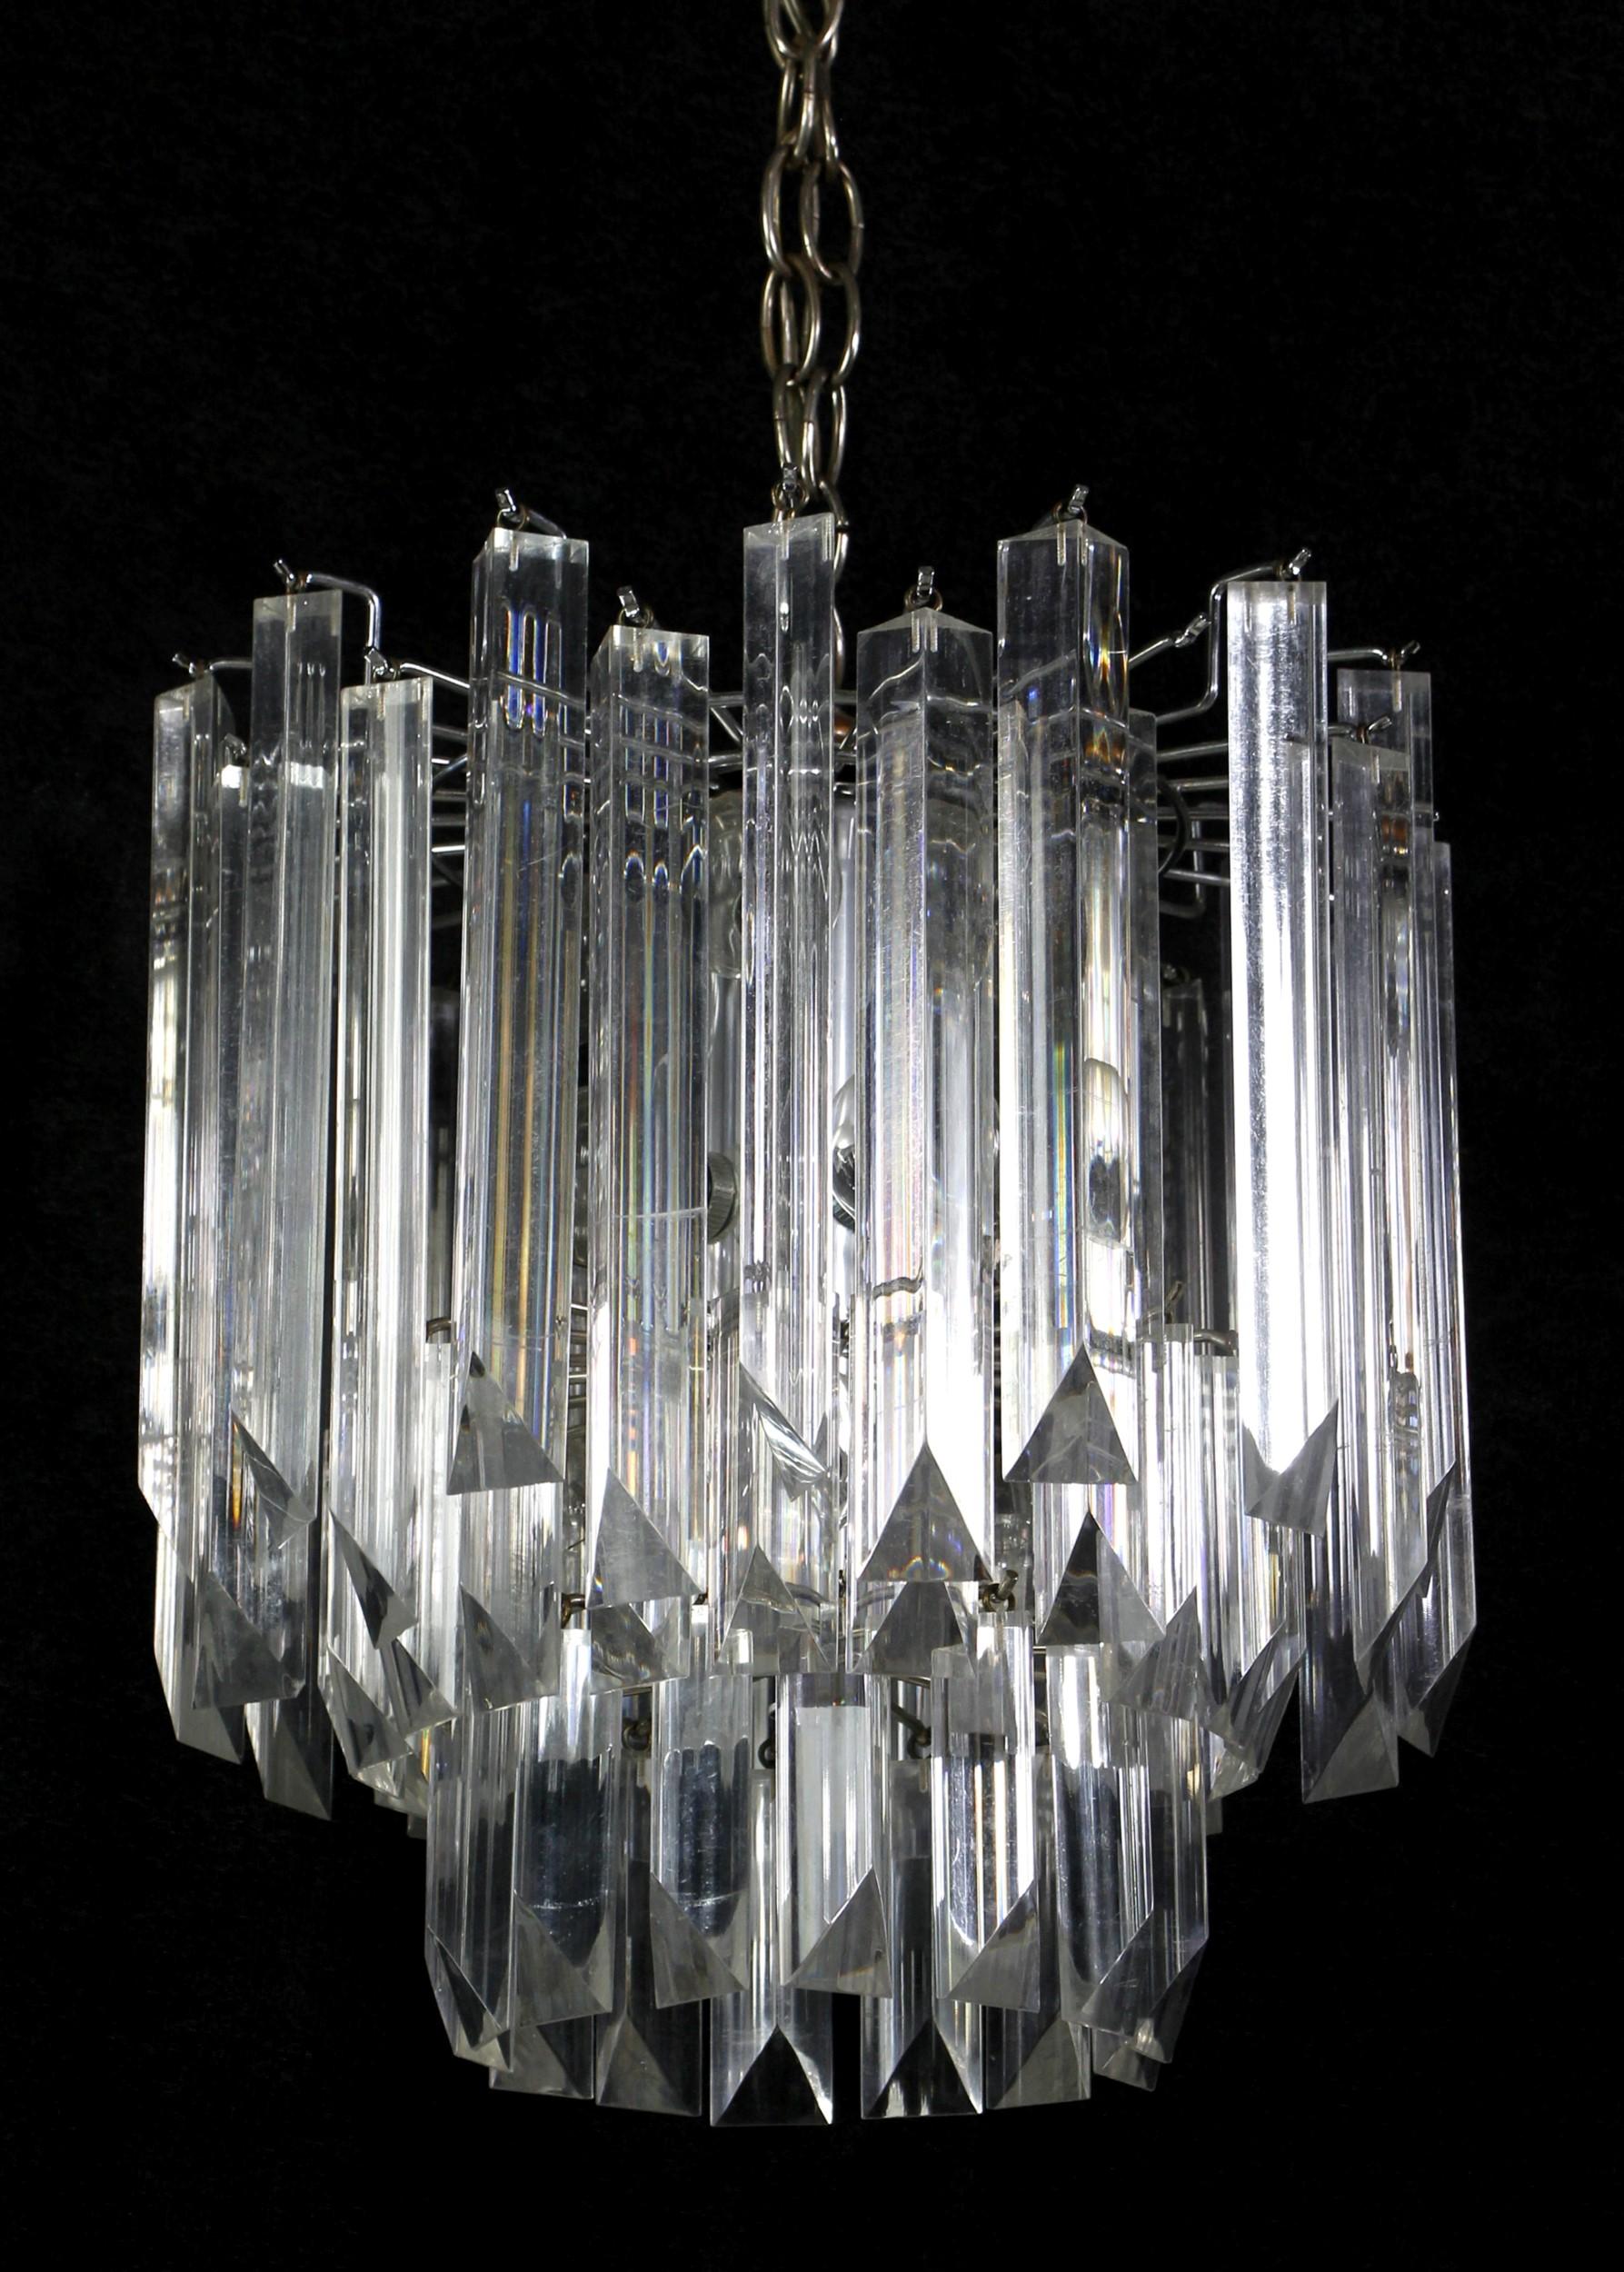 1970's Three-tier Lucite chandelier with clear prisms and chromed metal frame. This Mid-Century chandelier has provides a warm glow. Price includes restoration.

 